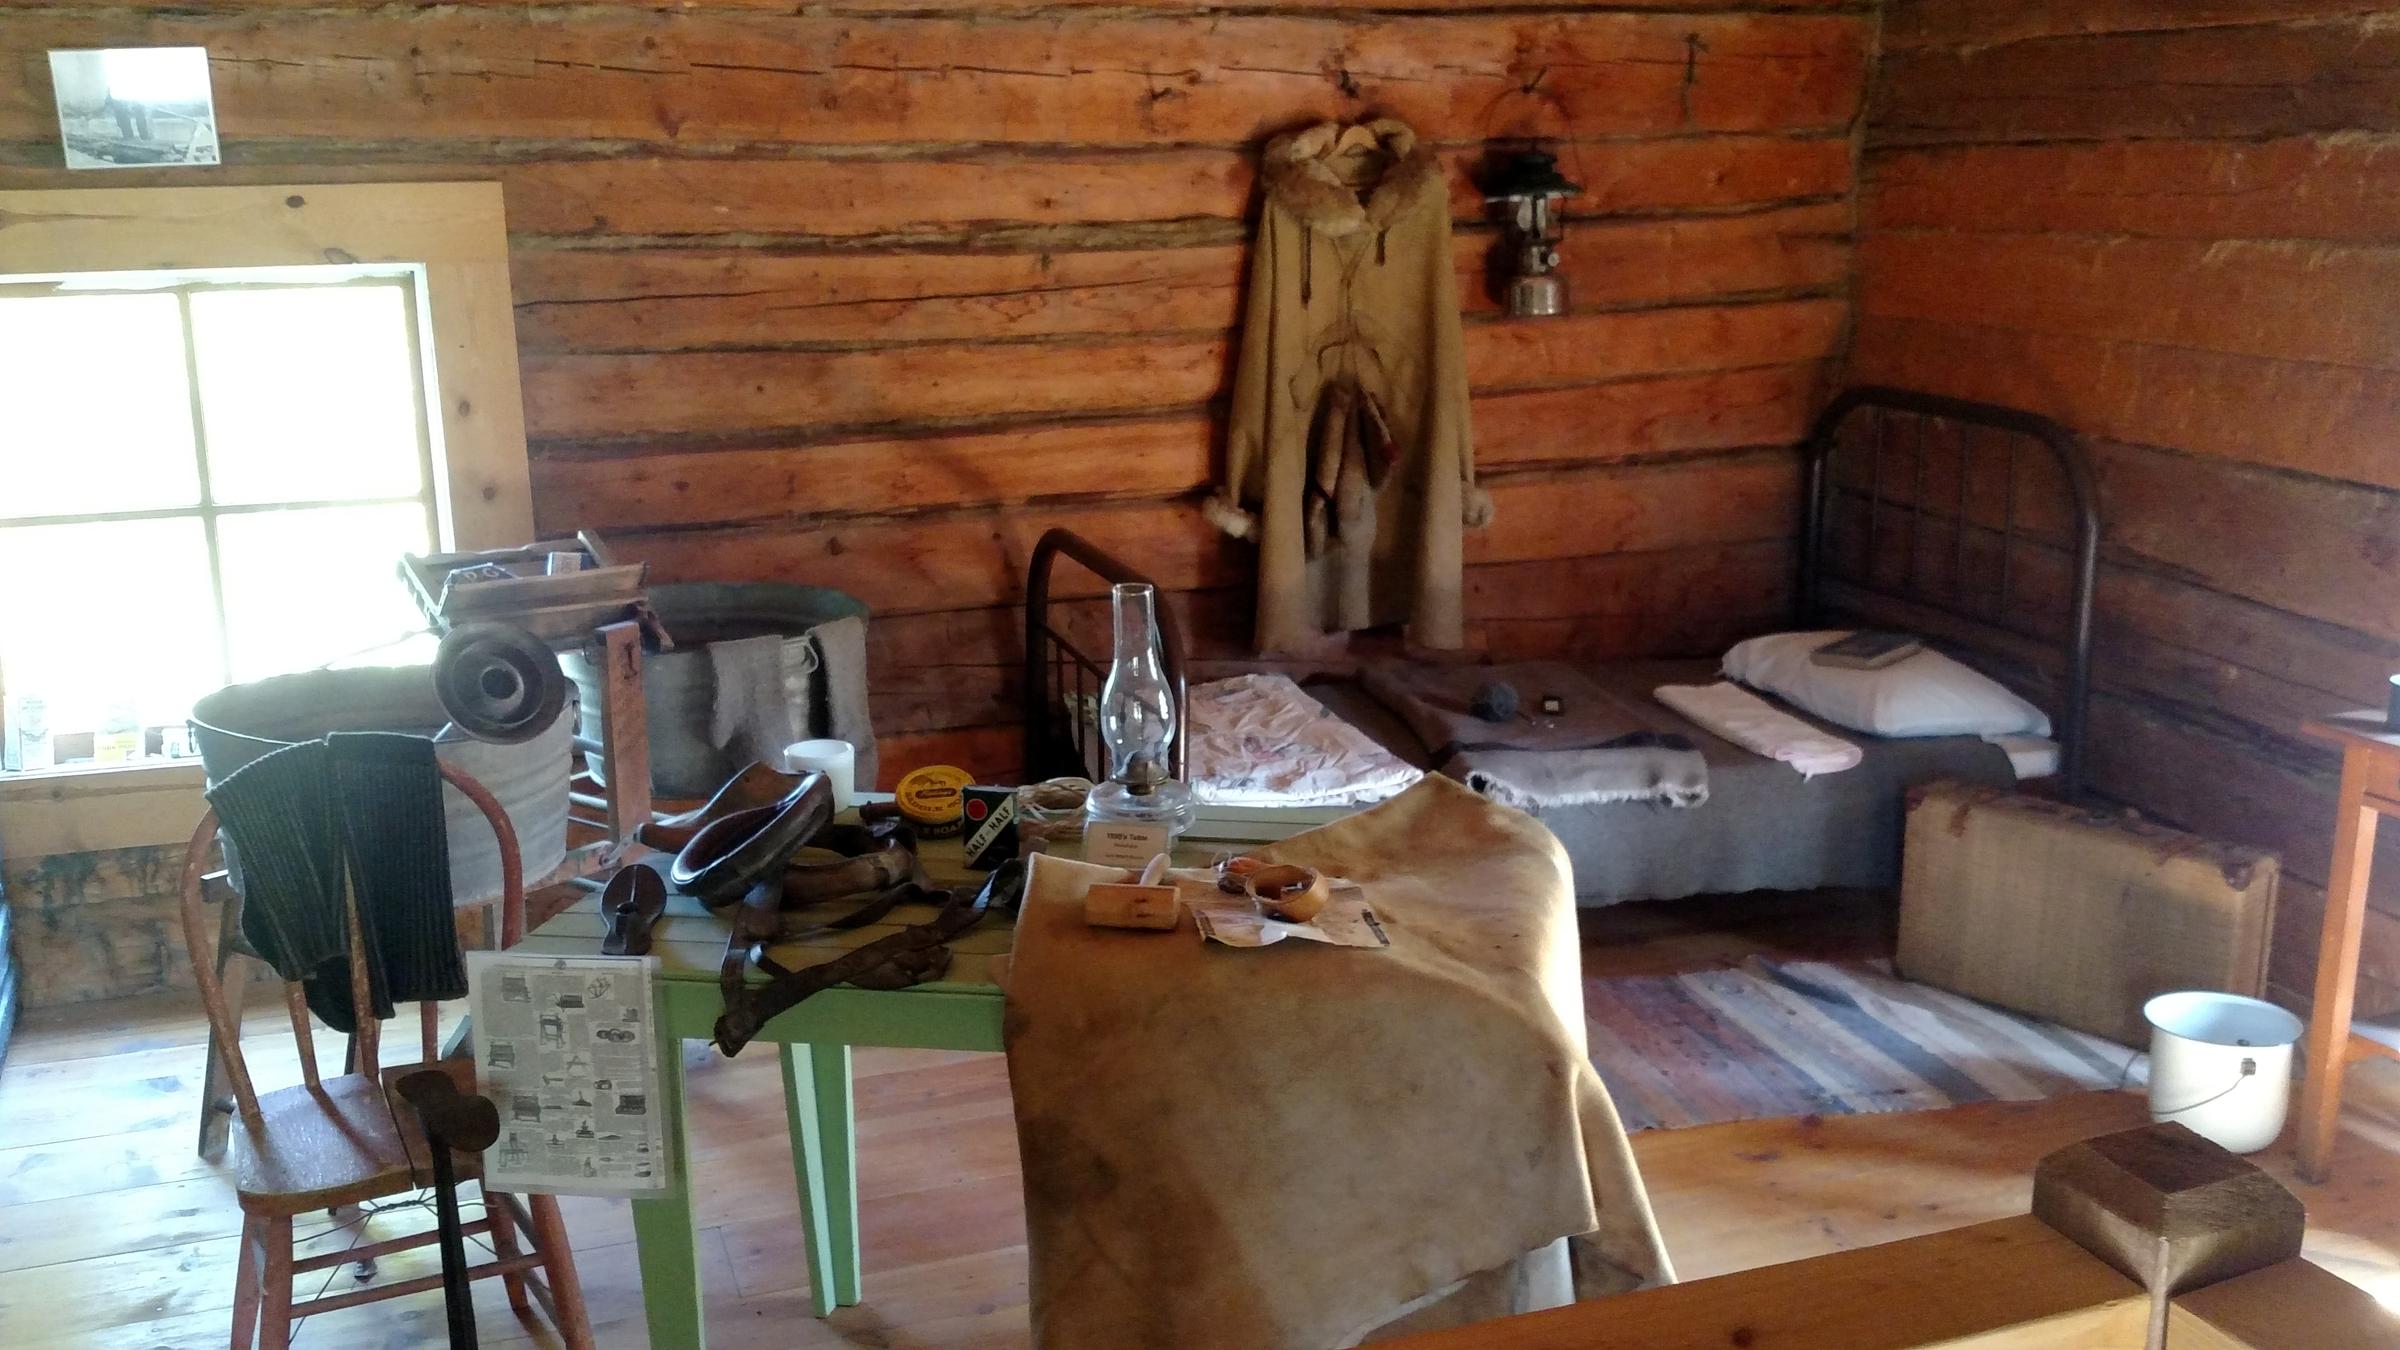 The living quarters cabin, like other historic buildings at the park, contains furniture from the period when Signal soldiers operated the telegraph station that was part of the old Washington-Alaska Military Cable and Telegraph System. (Photo by Tim Ellis, KUAC - Fairbanks)